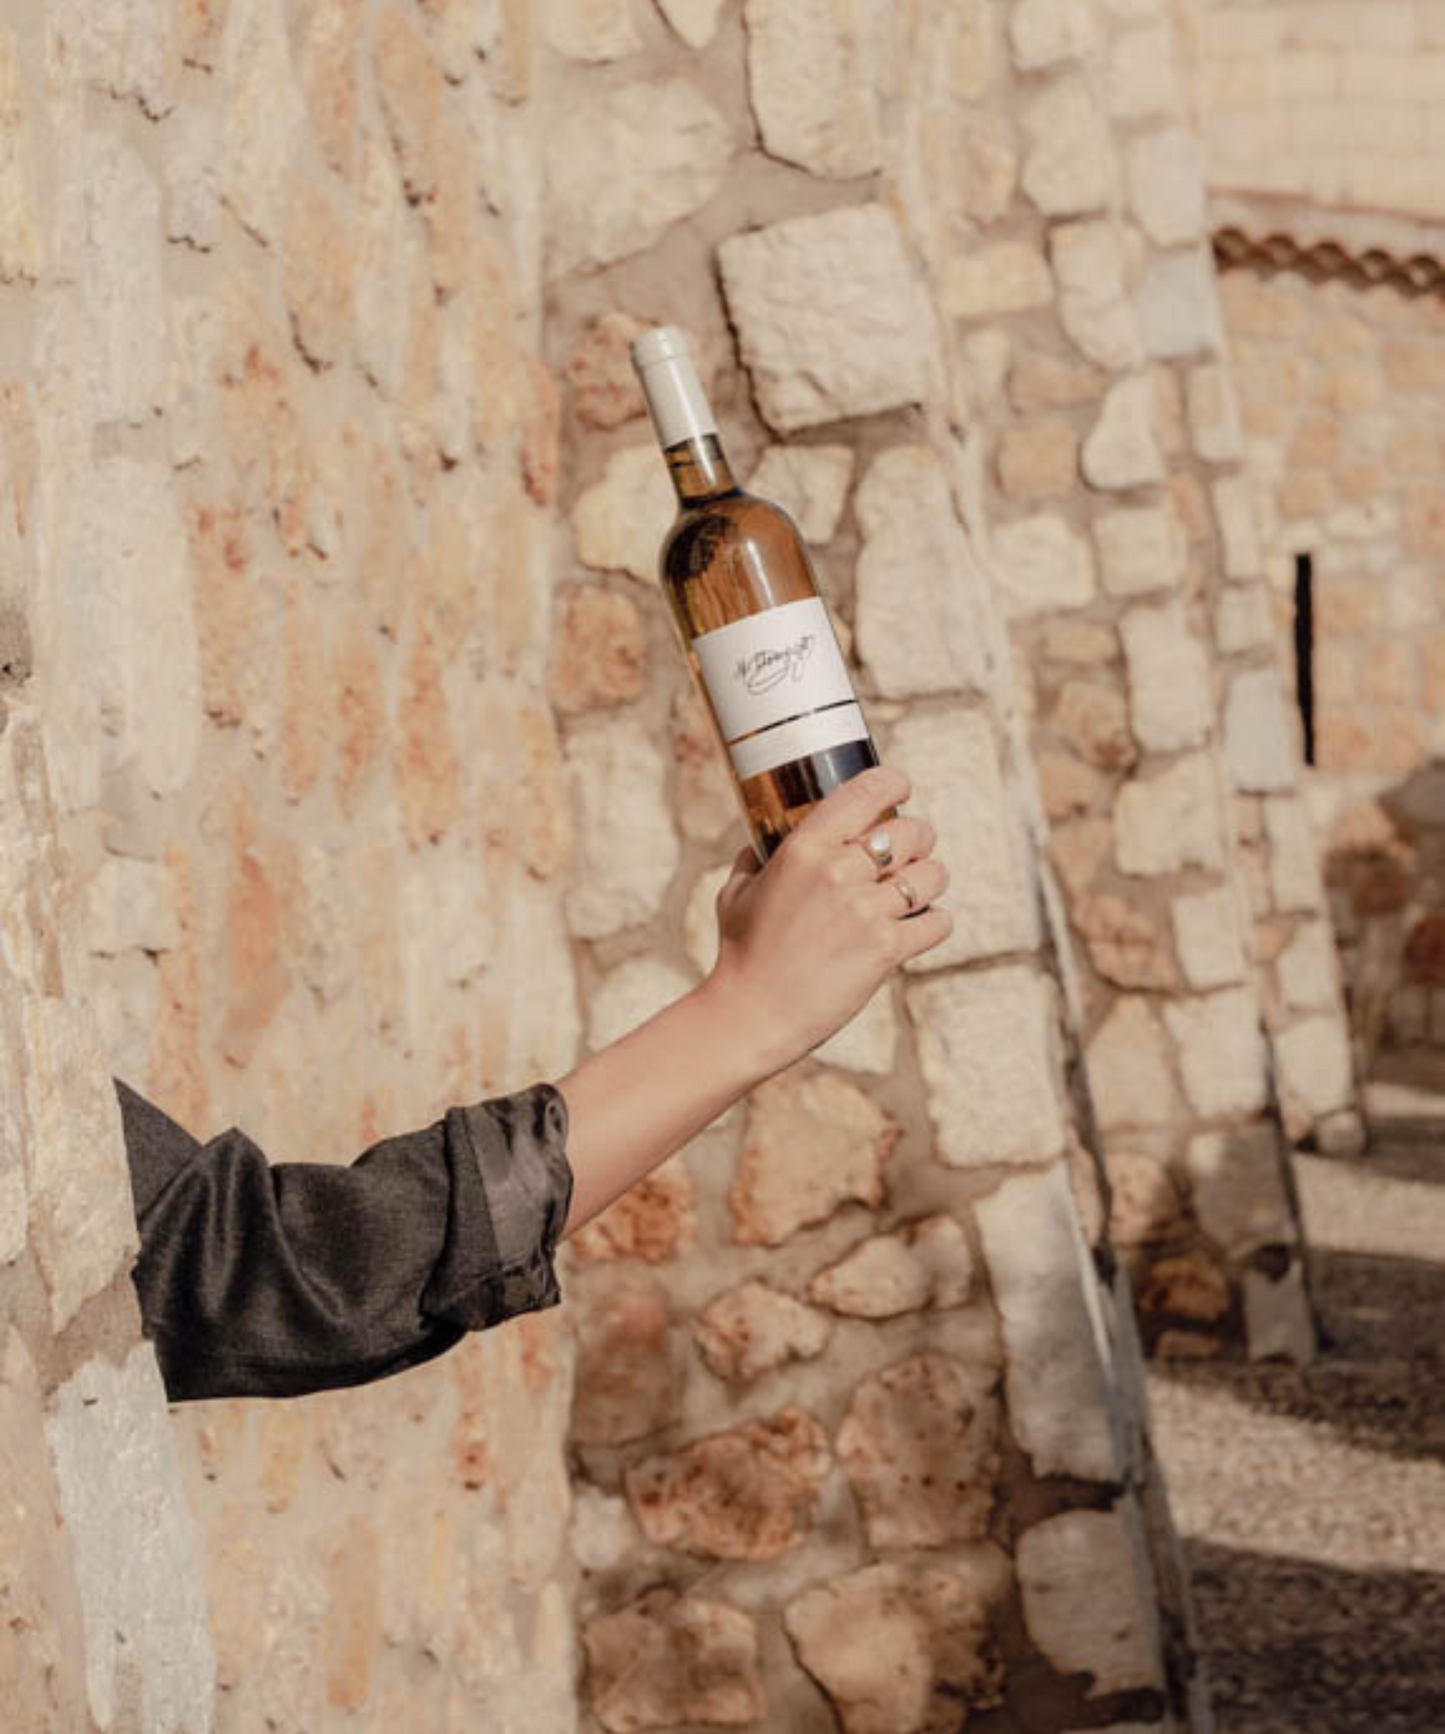 jane holding a bottle of rose behind a wall